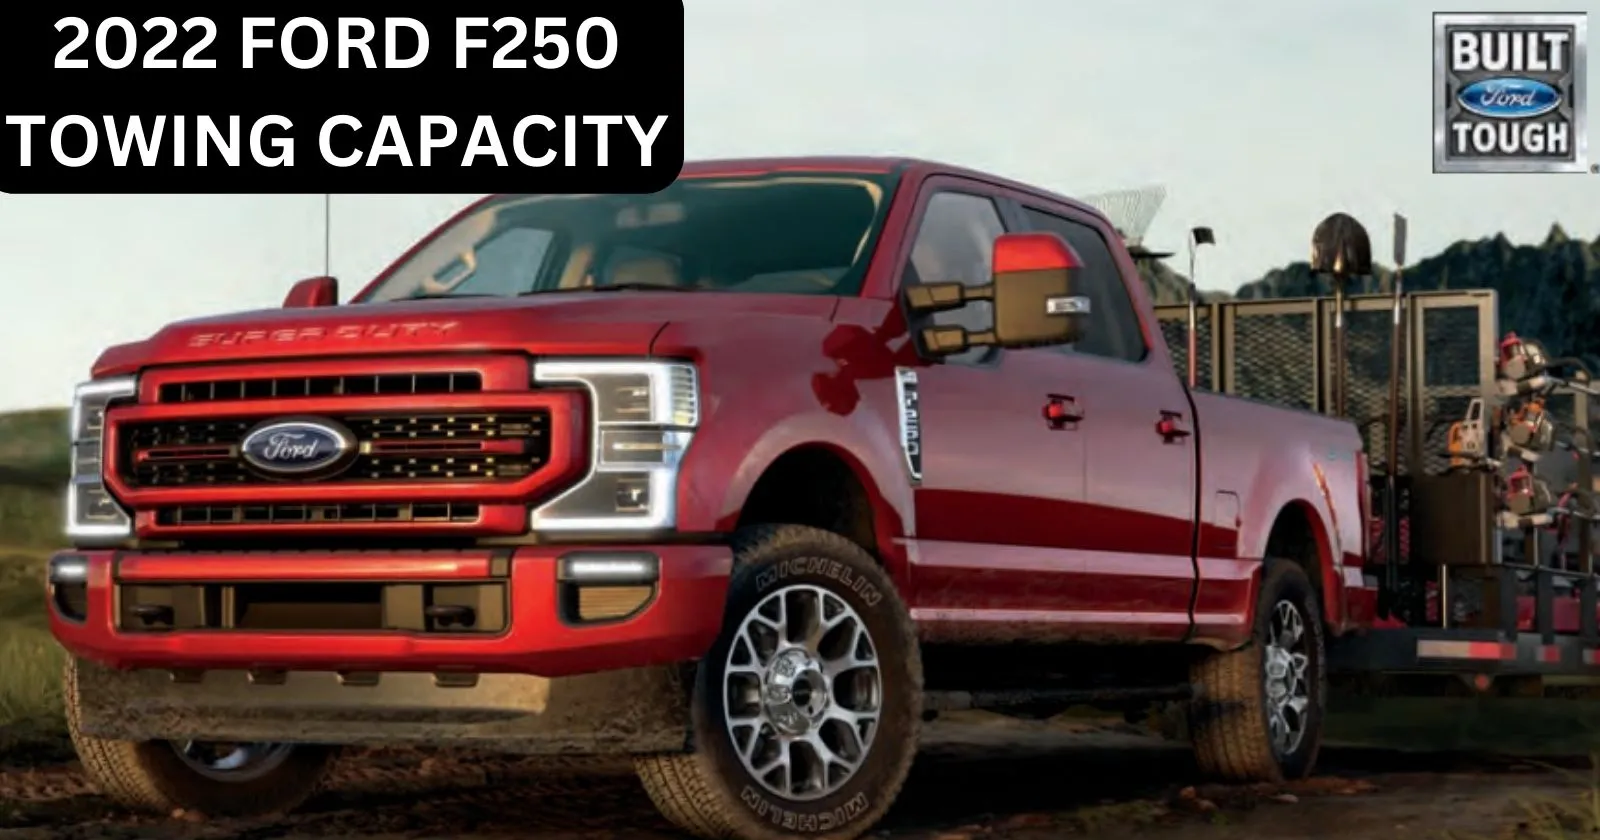 explore-2022-ford-f250-towing-capacity-with-chart-thecartowing